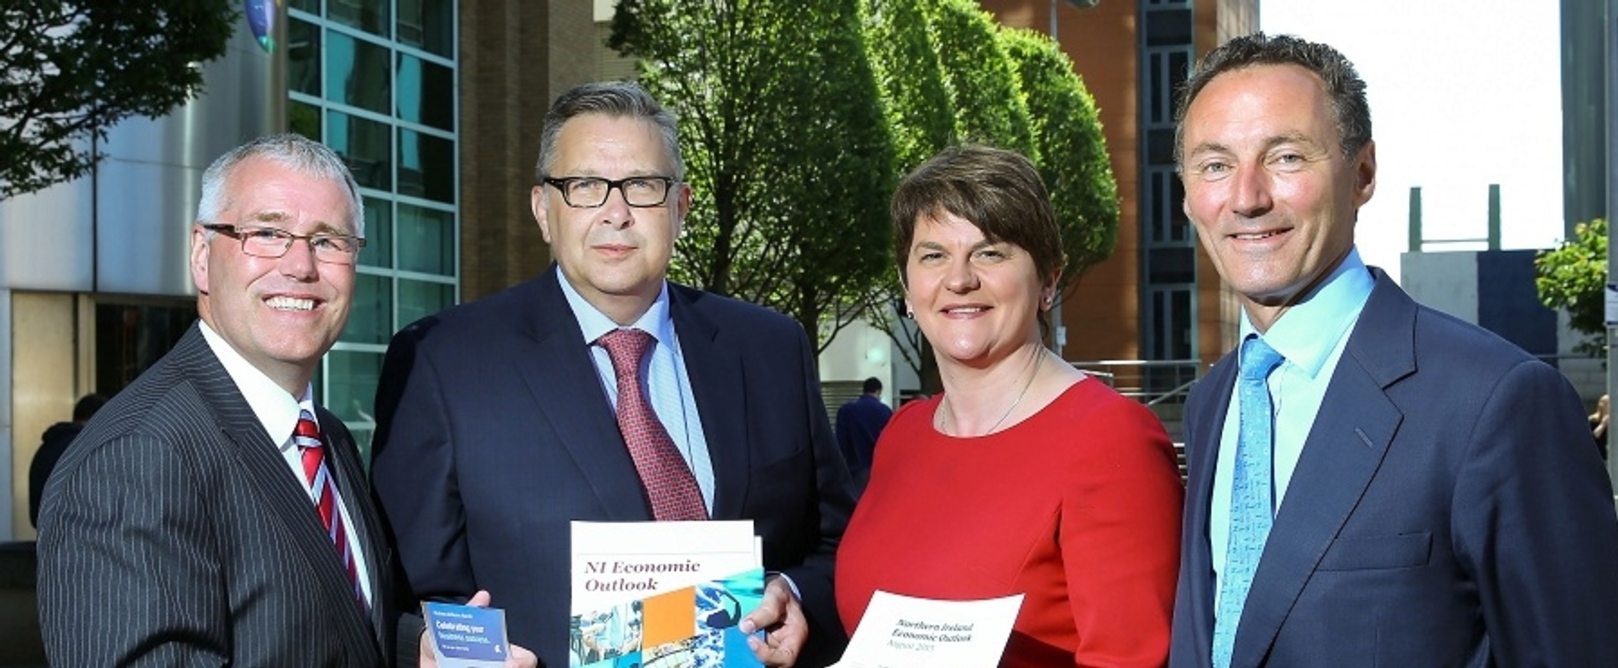 NI Printing Industry represented at briefing with Arlene Foster MLA